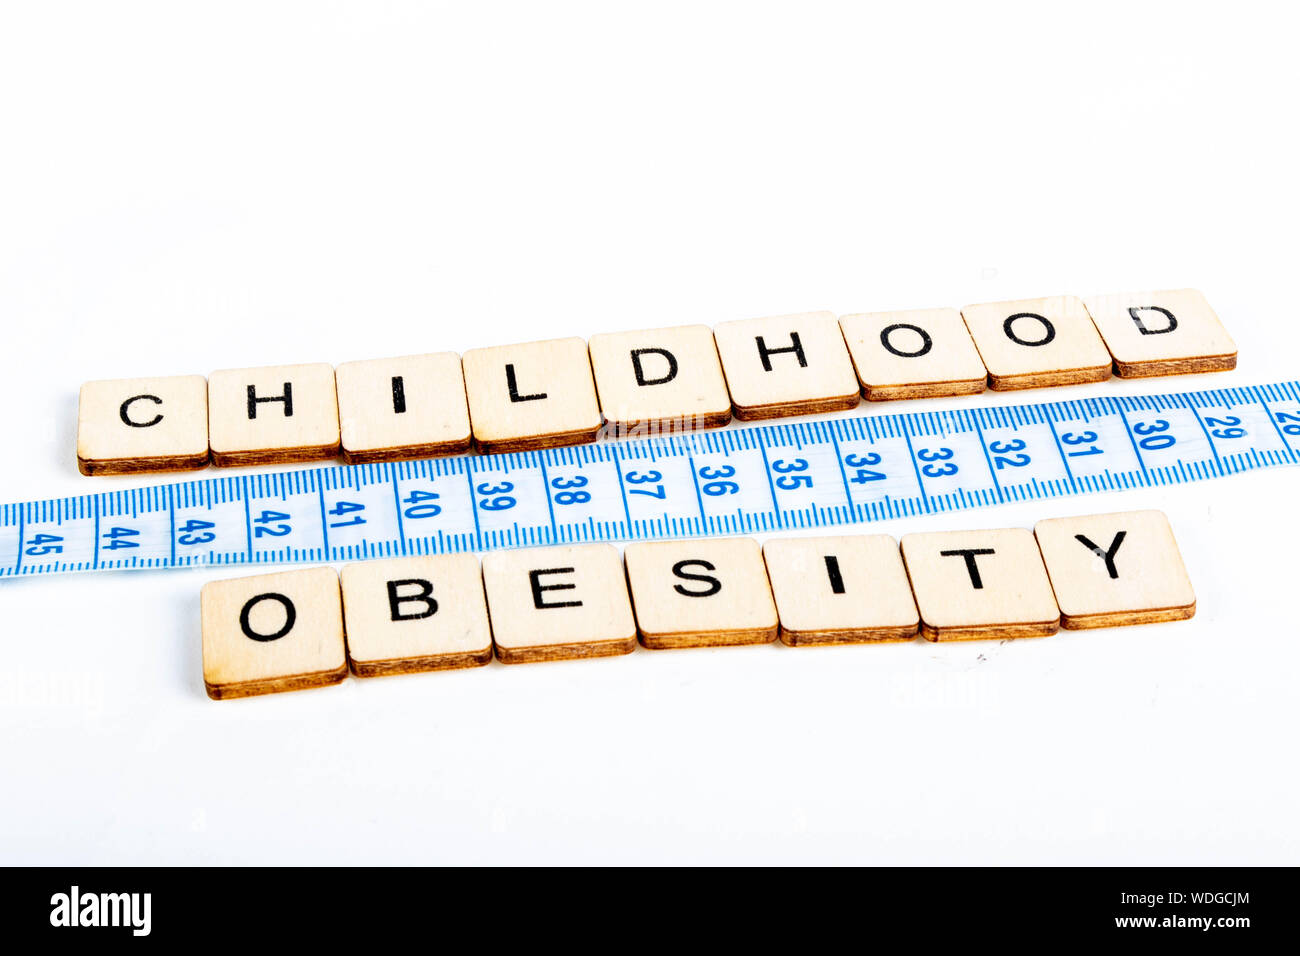 Health concept of a tape measure also showing the message Childhood Obesity Stock Photo